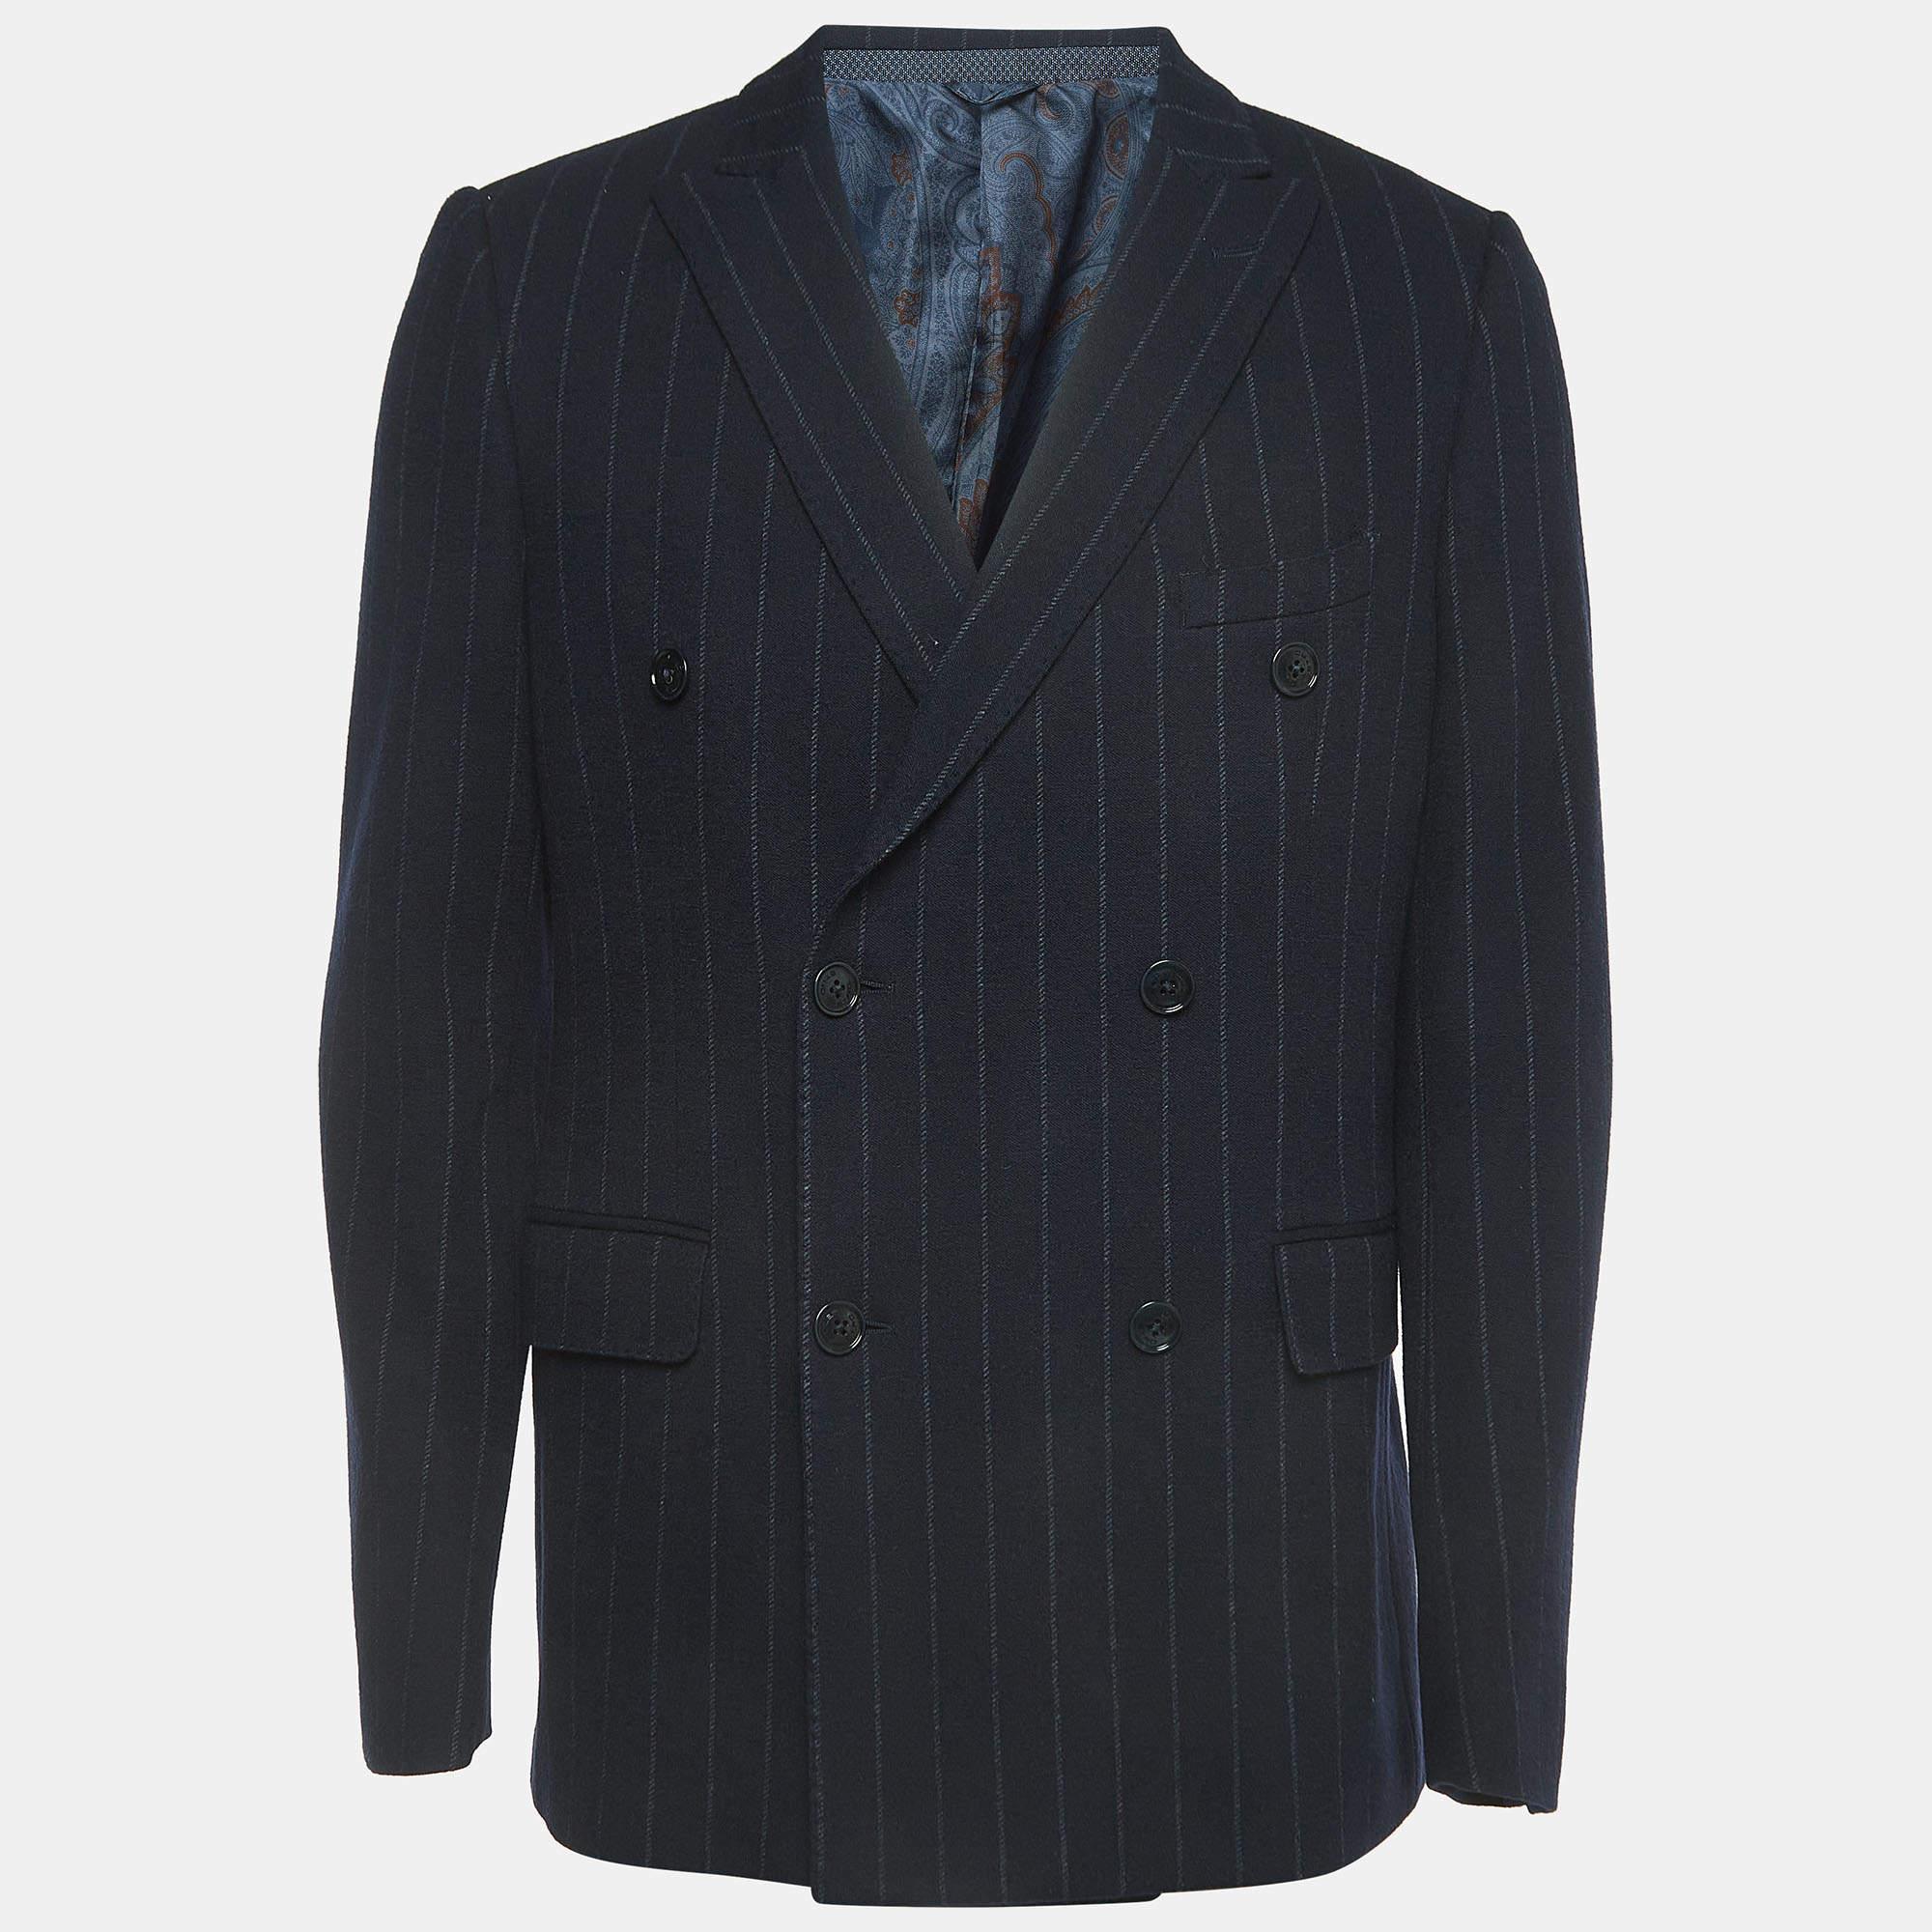 The navy blue shade and the smart shape make this Etro wool blazer for men a covetable piece. It has long sleeves and a double-breasted front closure. Wear this one for a refined look.

